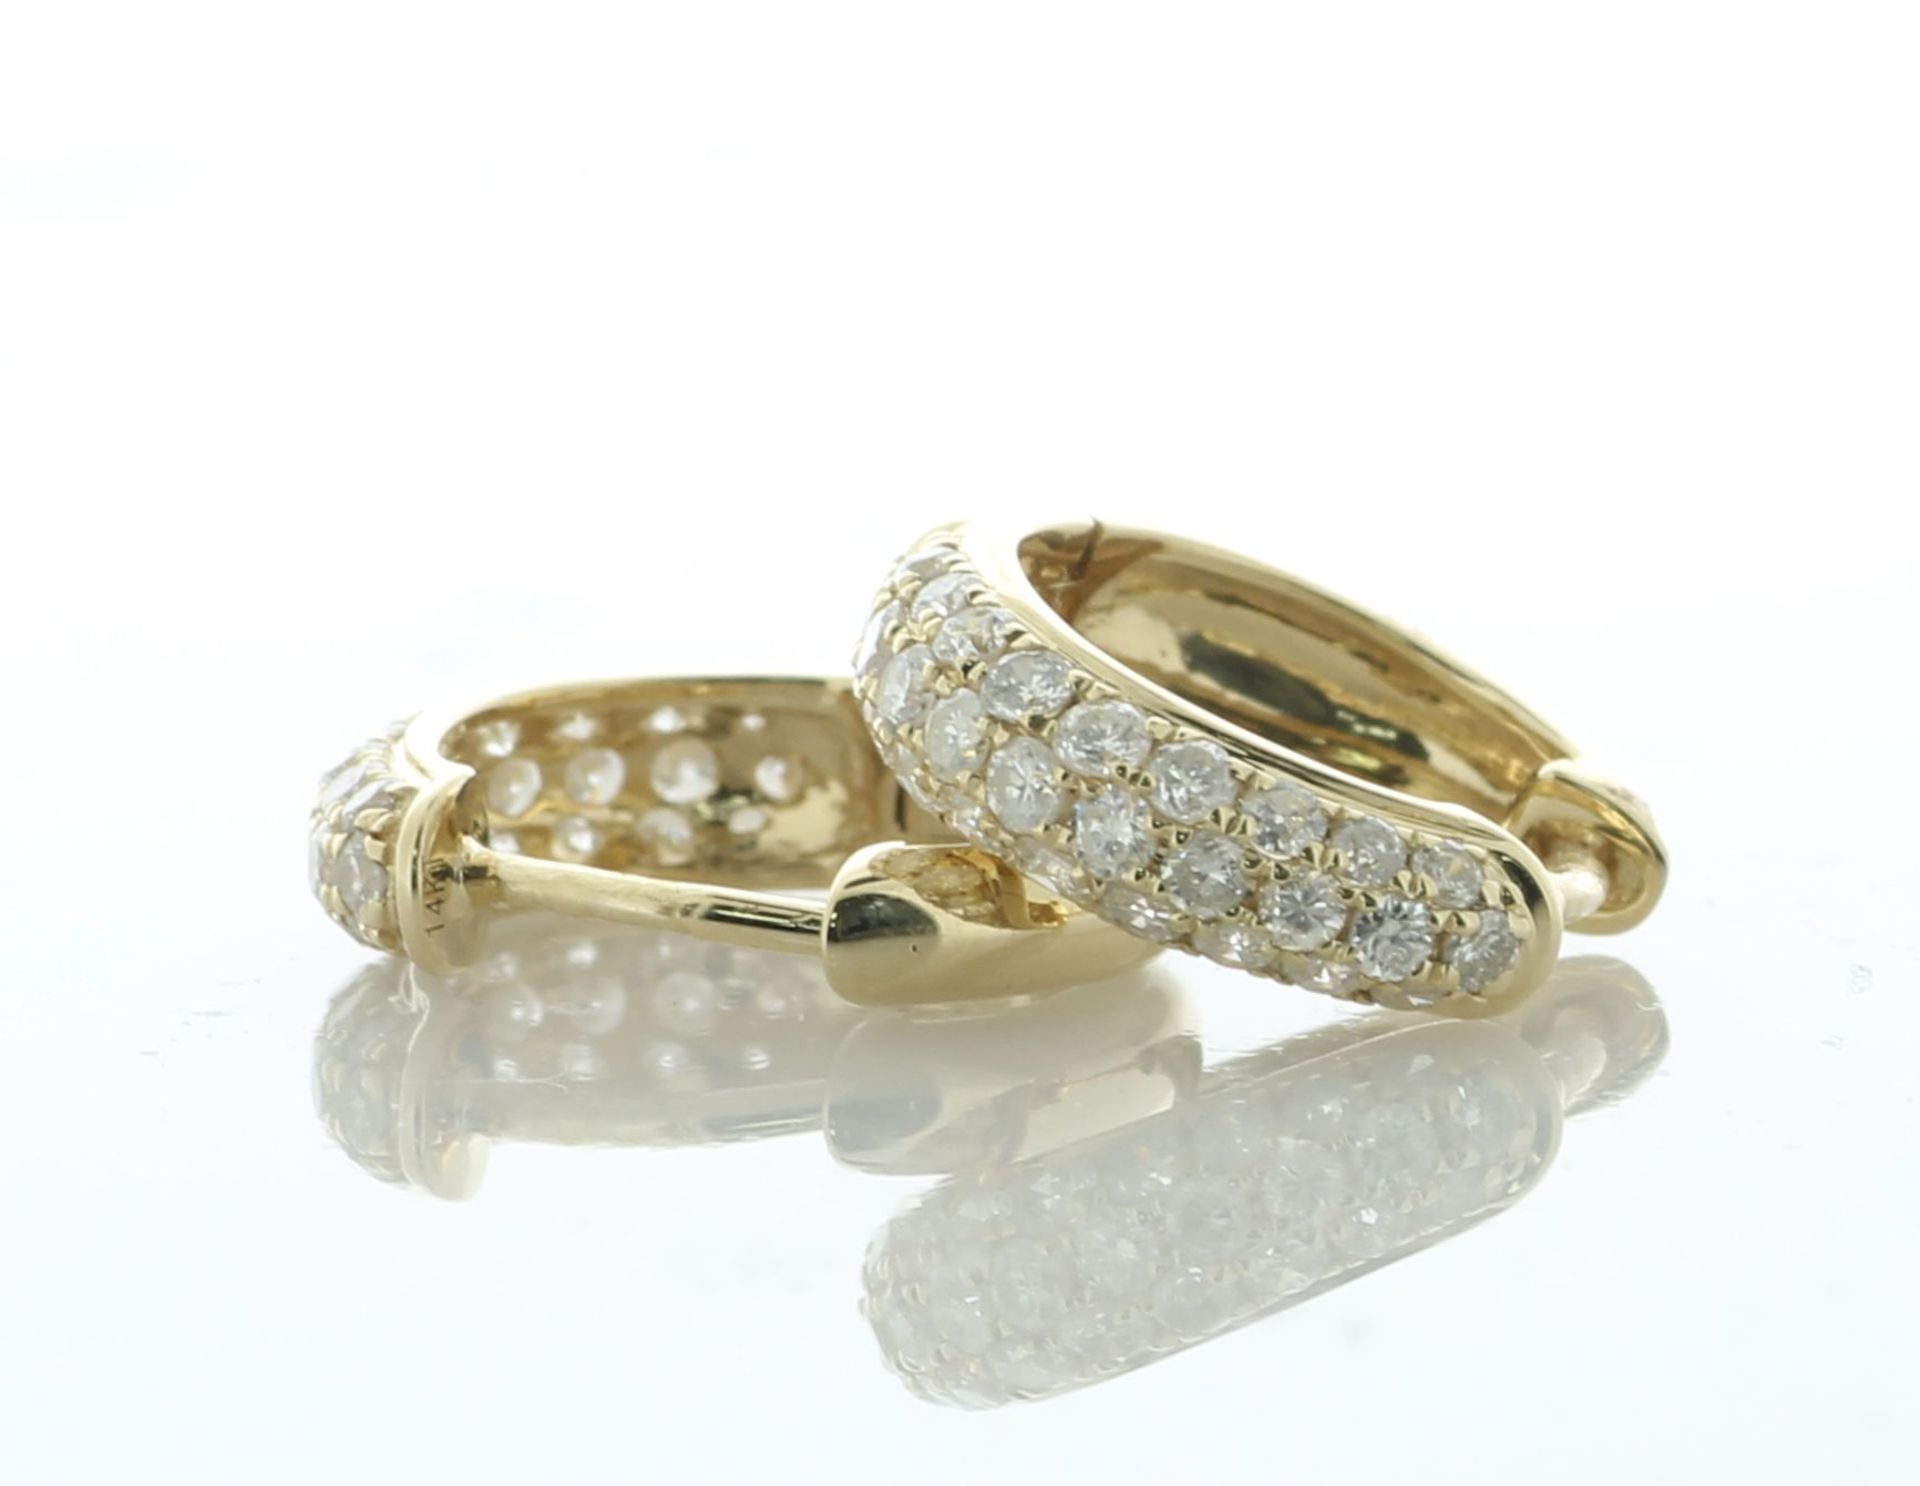 14ct Yellow Gold Semi Eternity Diamond Hoop Earring 0.55 Carats - Valued By IDI £2,650.00 - These